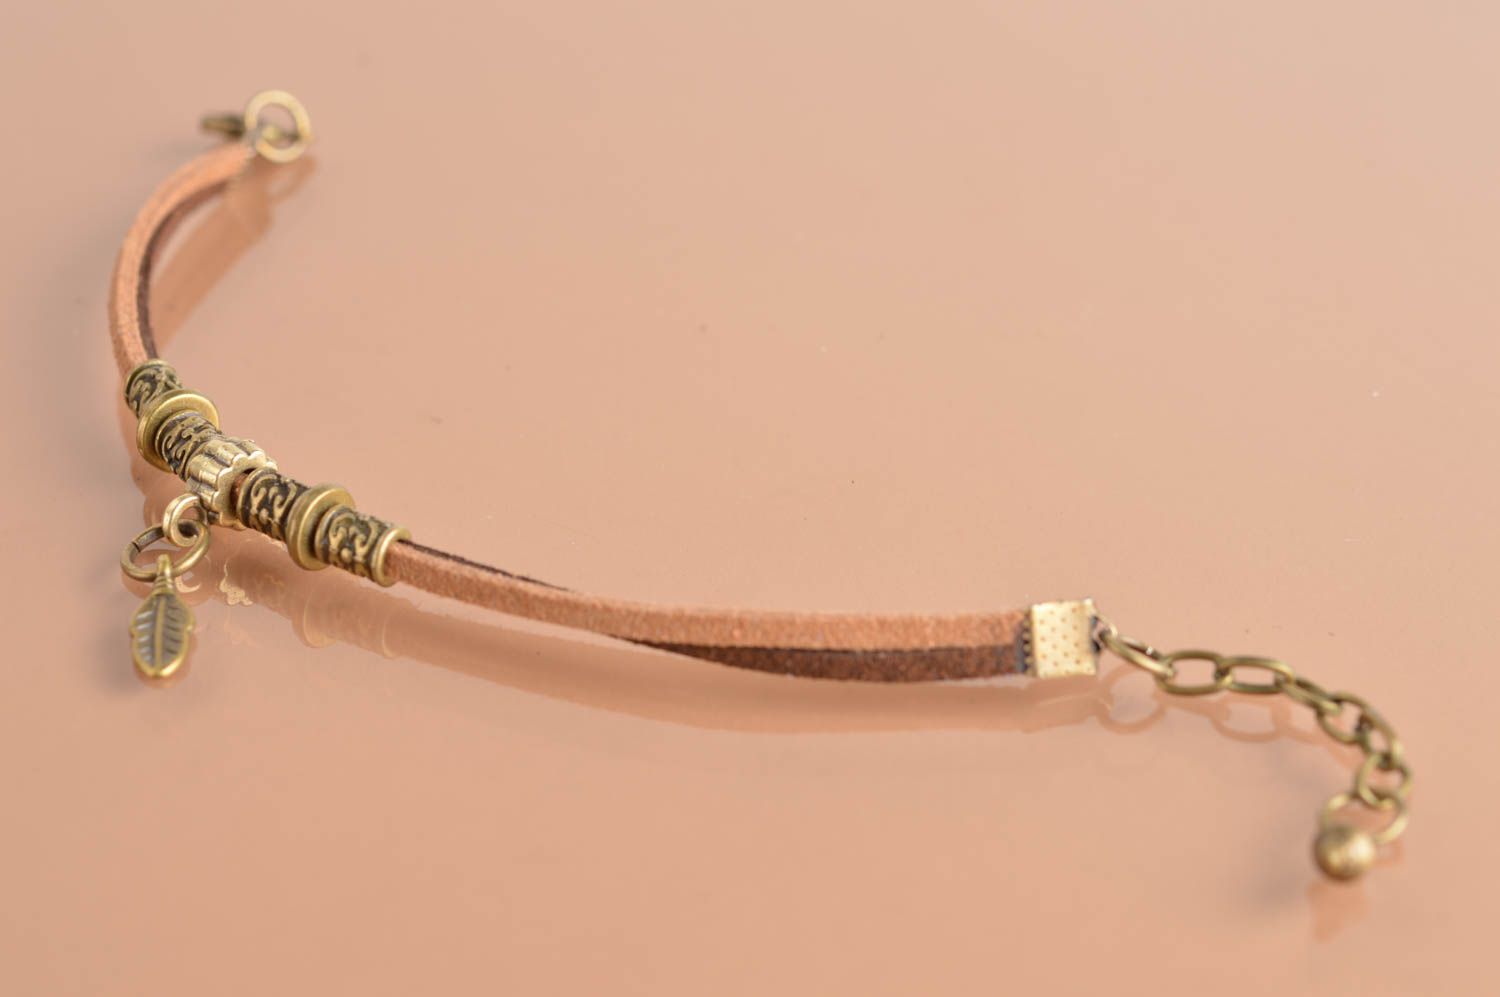 Handmade designer thin bracelet made of chamois leather lace with goldish charms photo 2